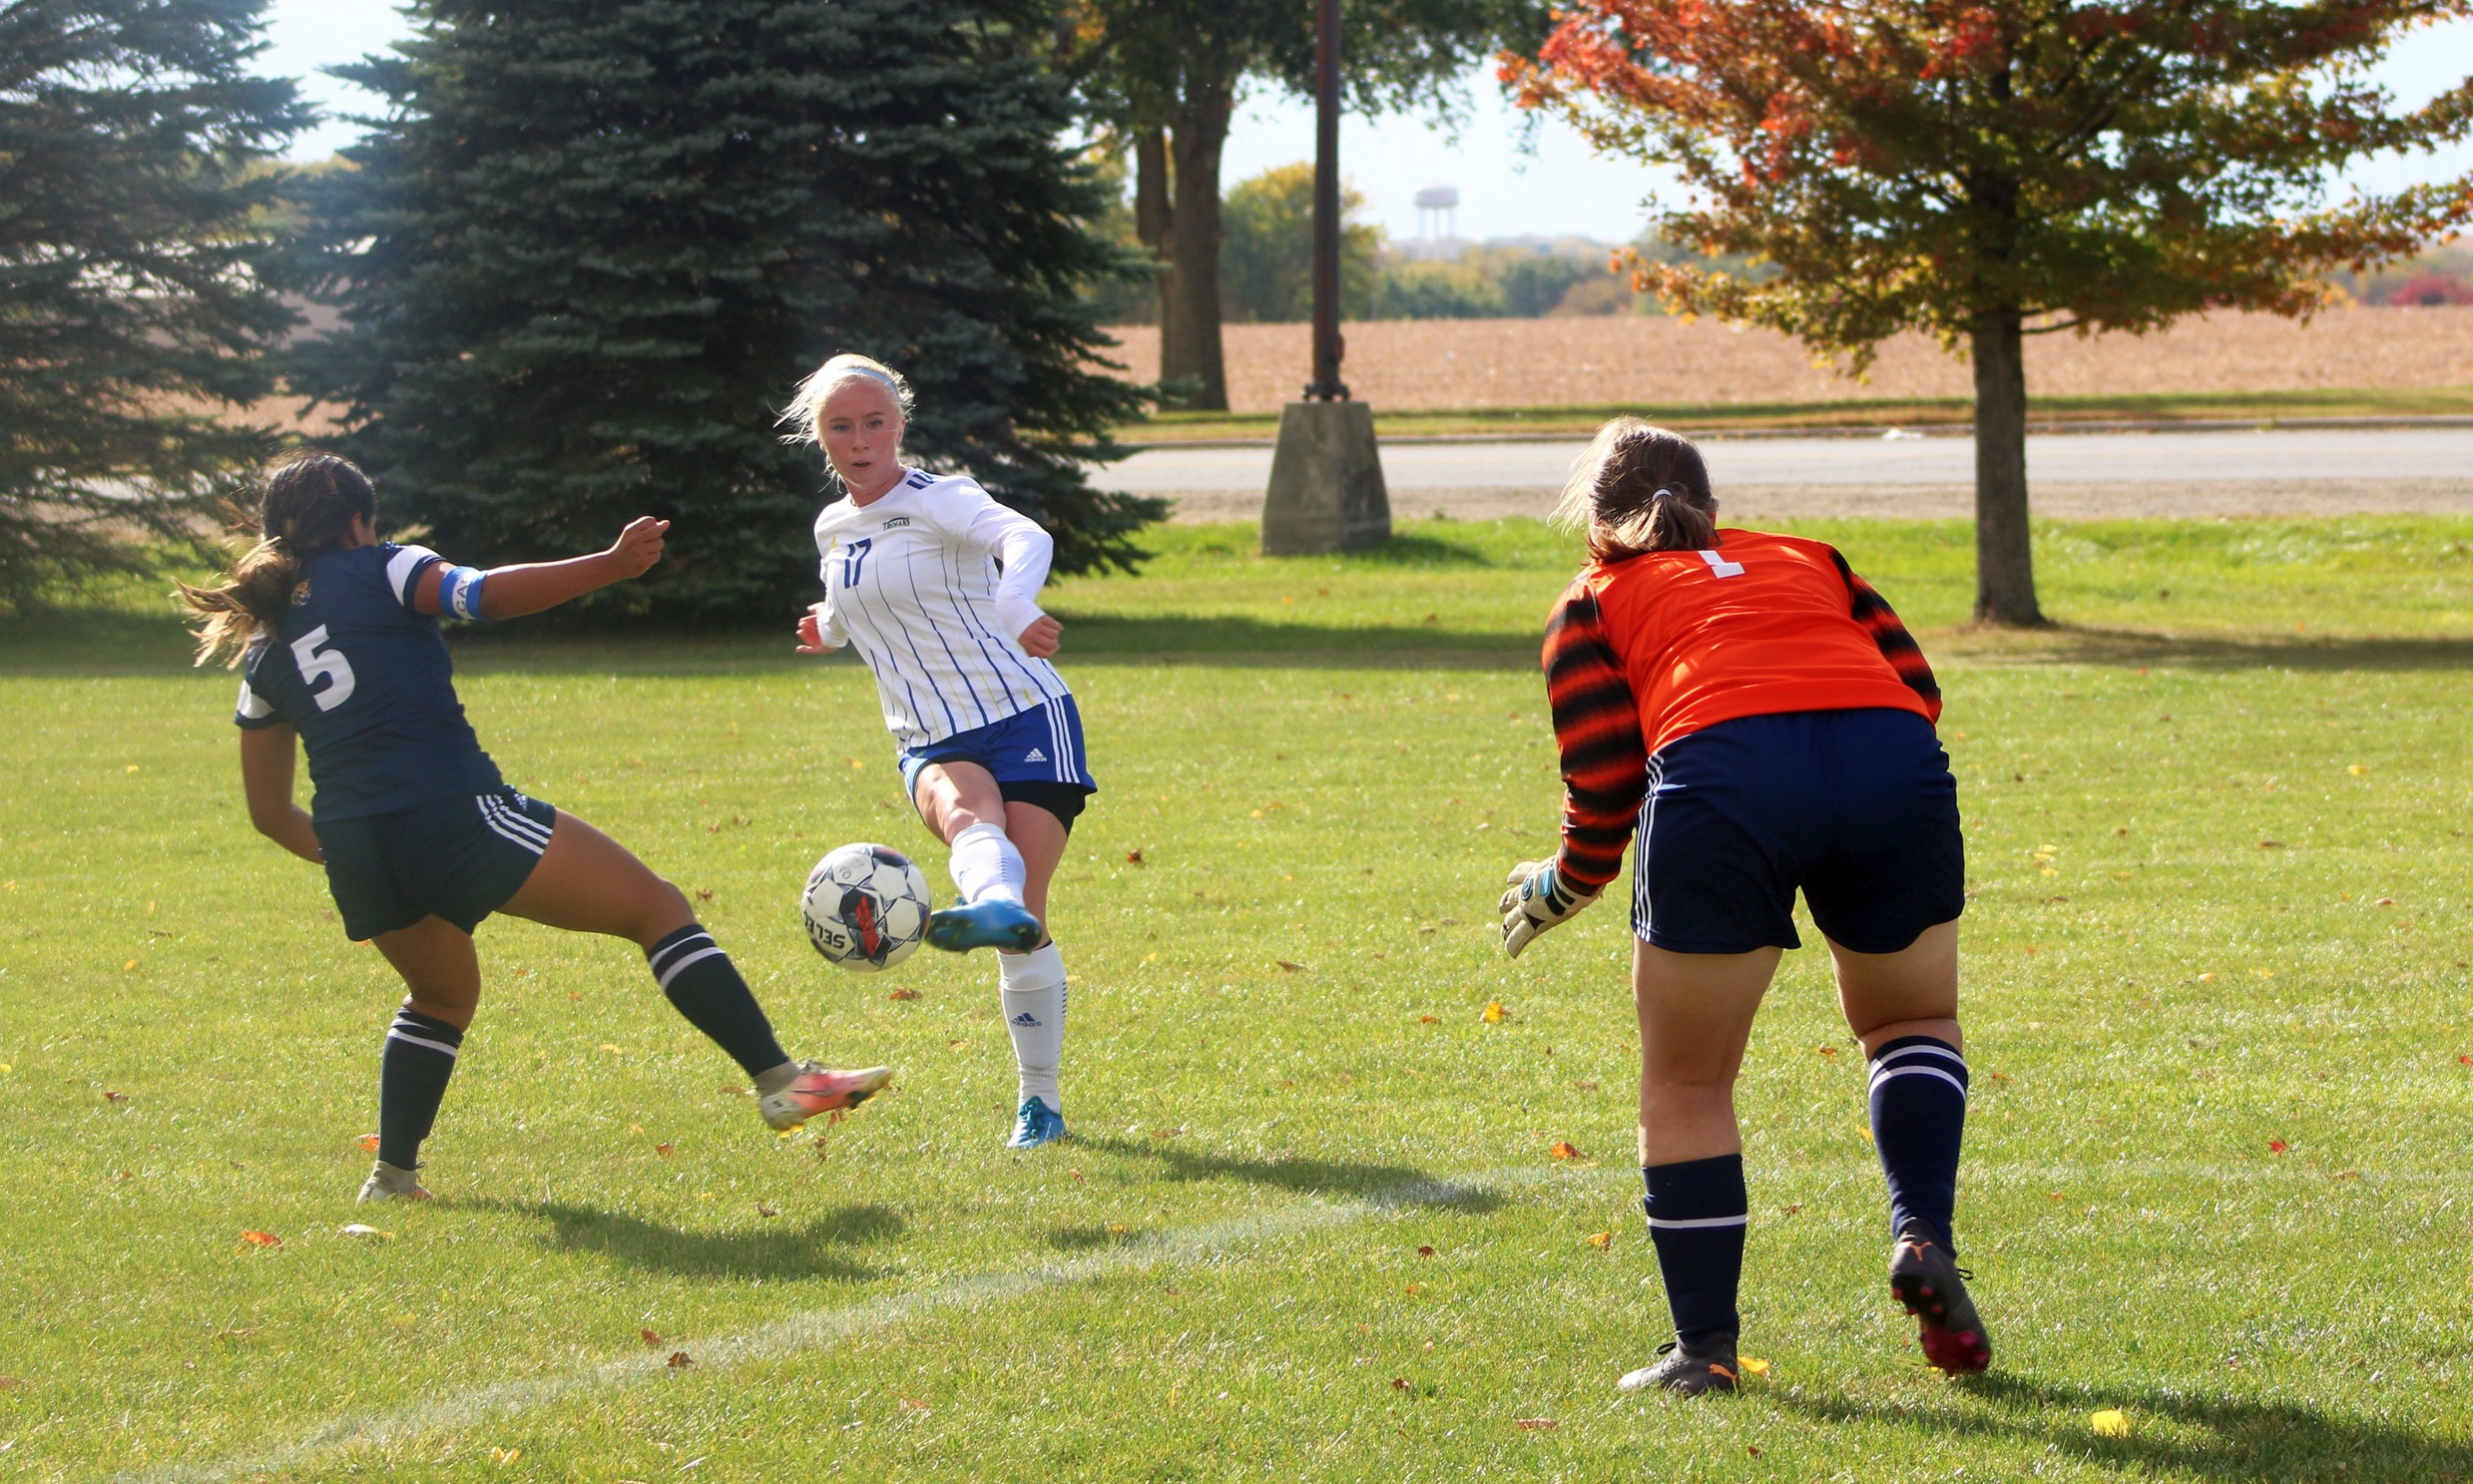 NIACC's Liv Staberg scores a first-half goal against Marshalltown CC on Wednesday.